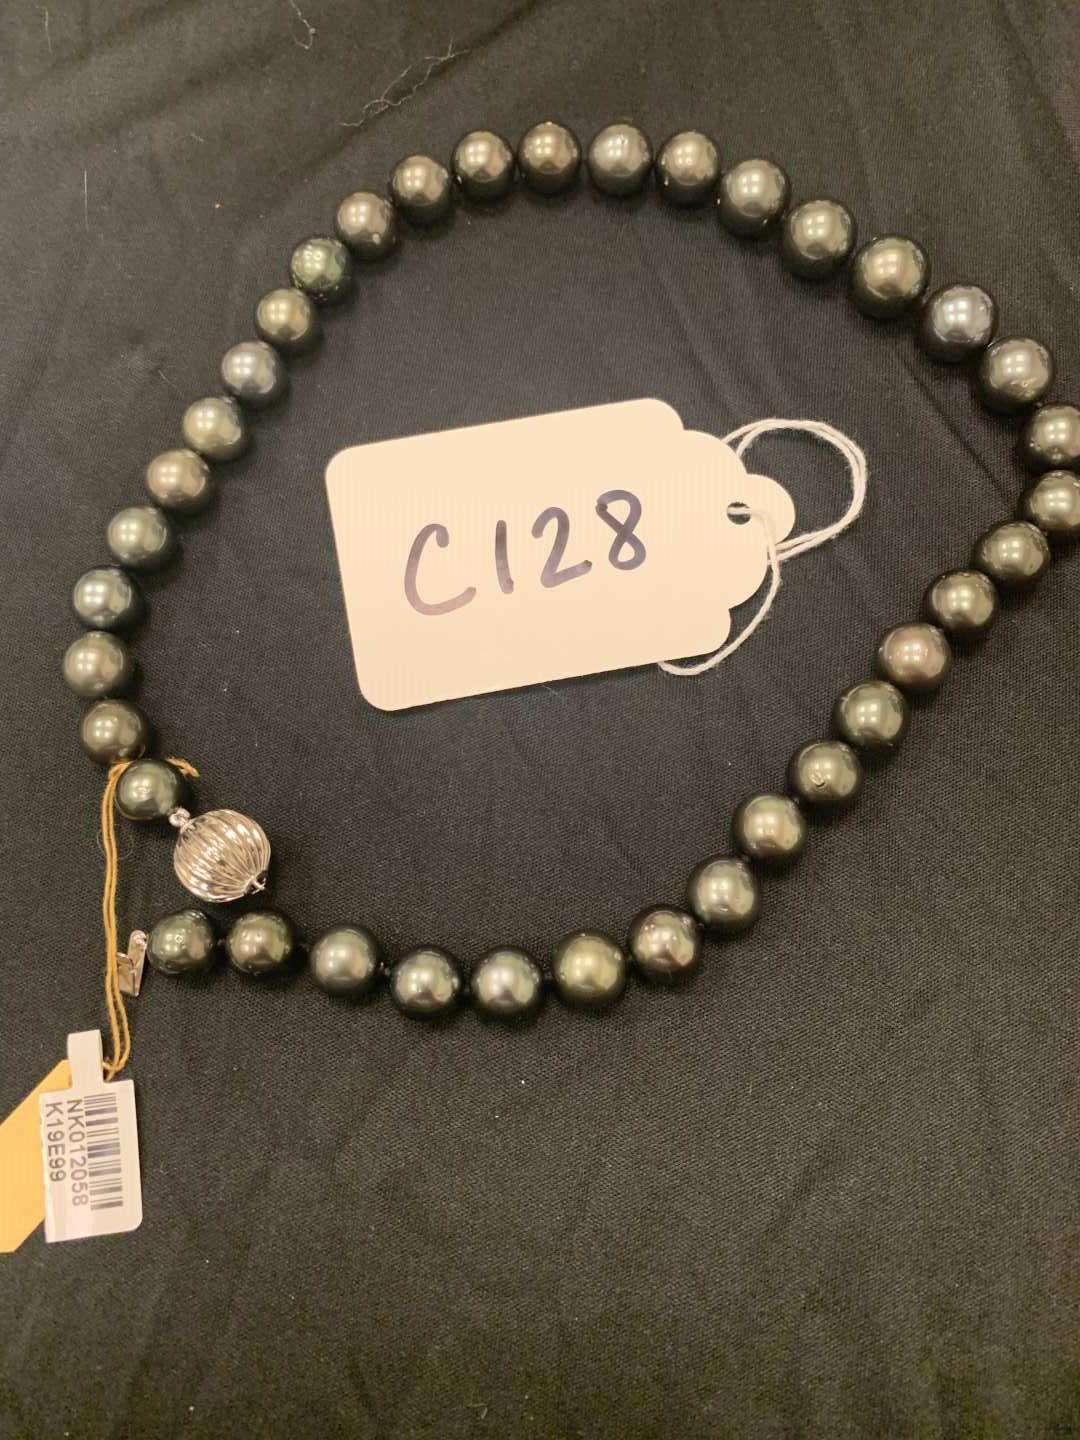 0th Image of a N/A NECKLACE PEARL